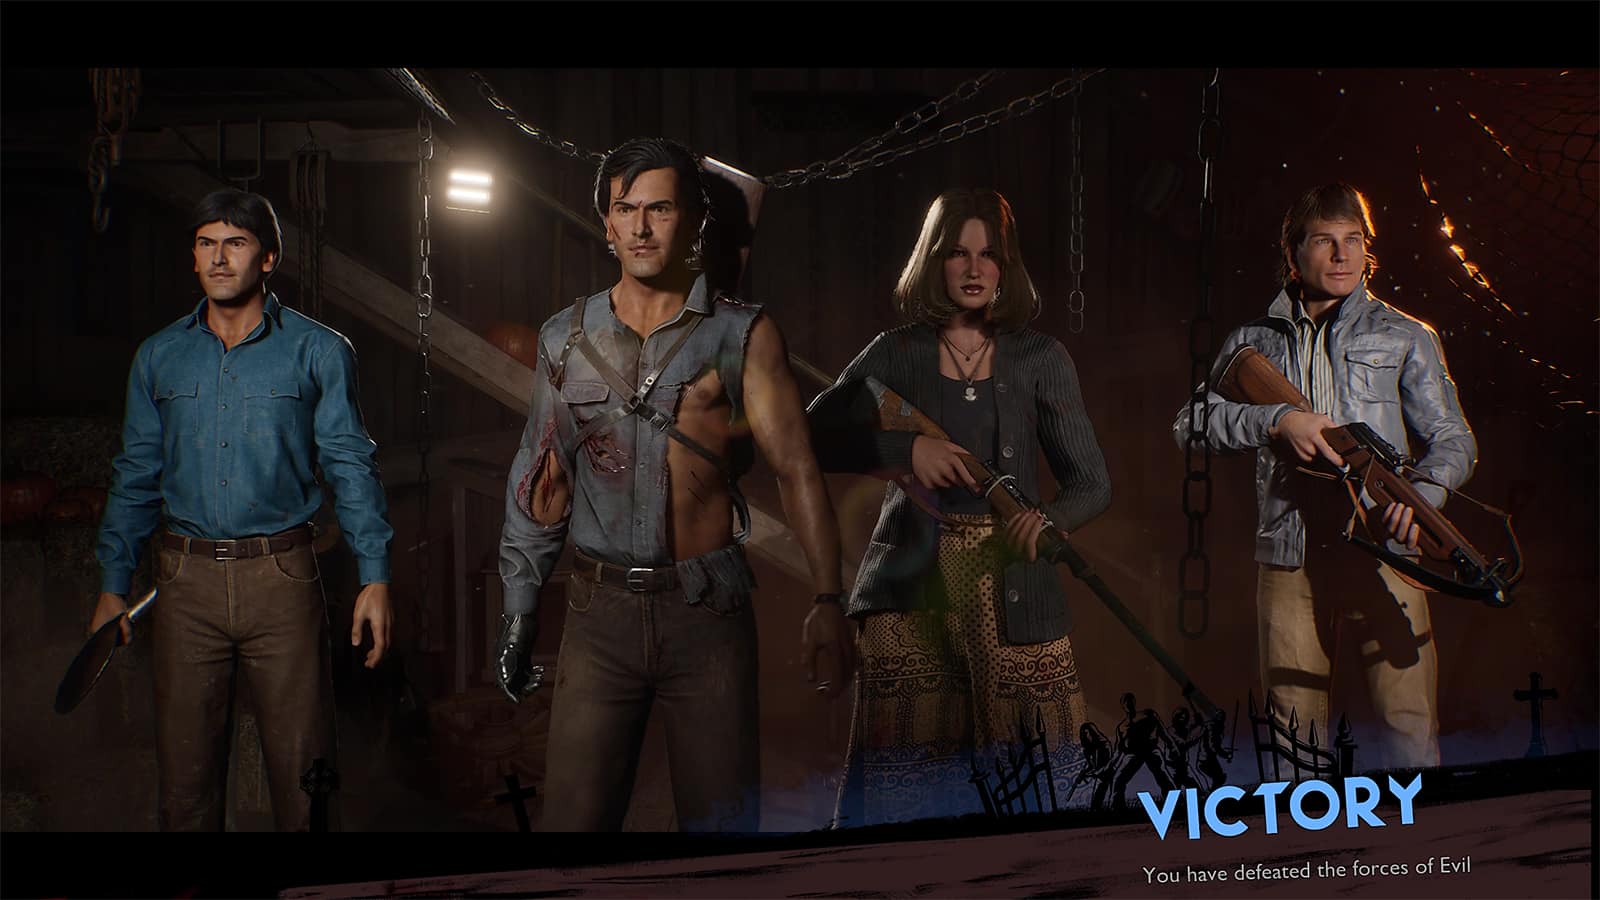 Evil Dead The Game Review: Mostly Groovy